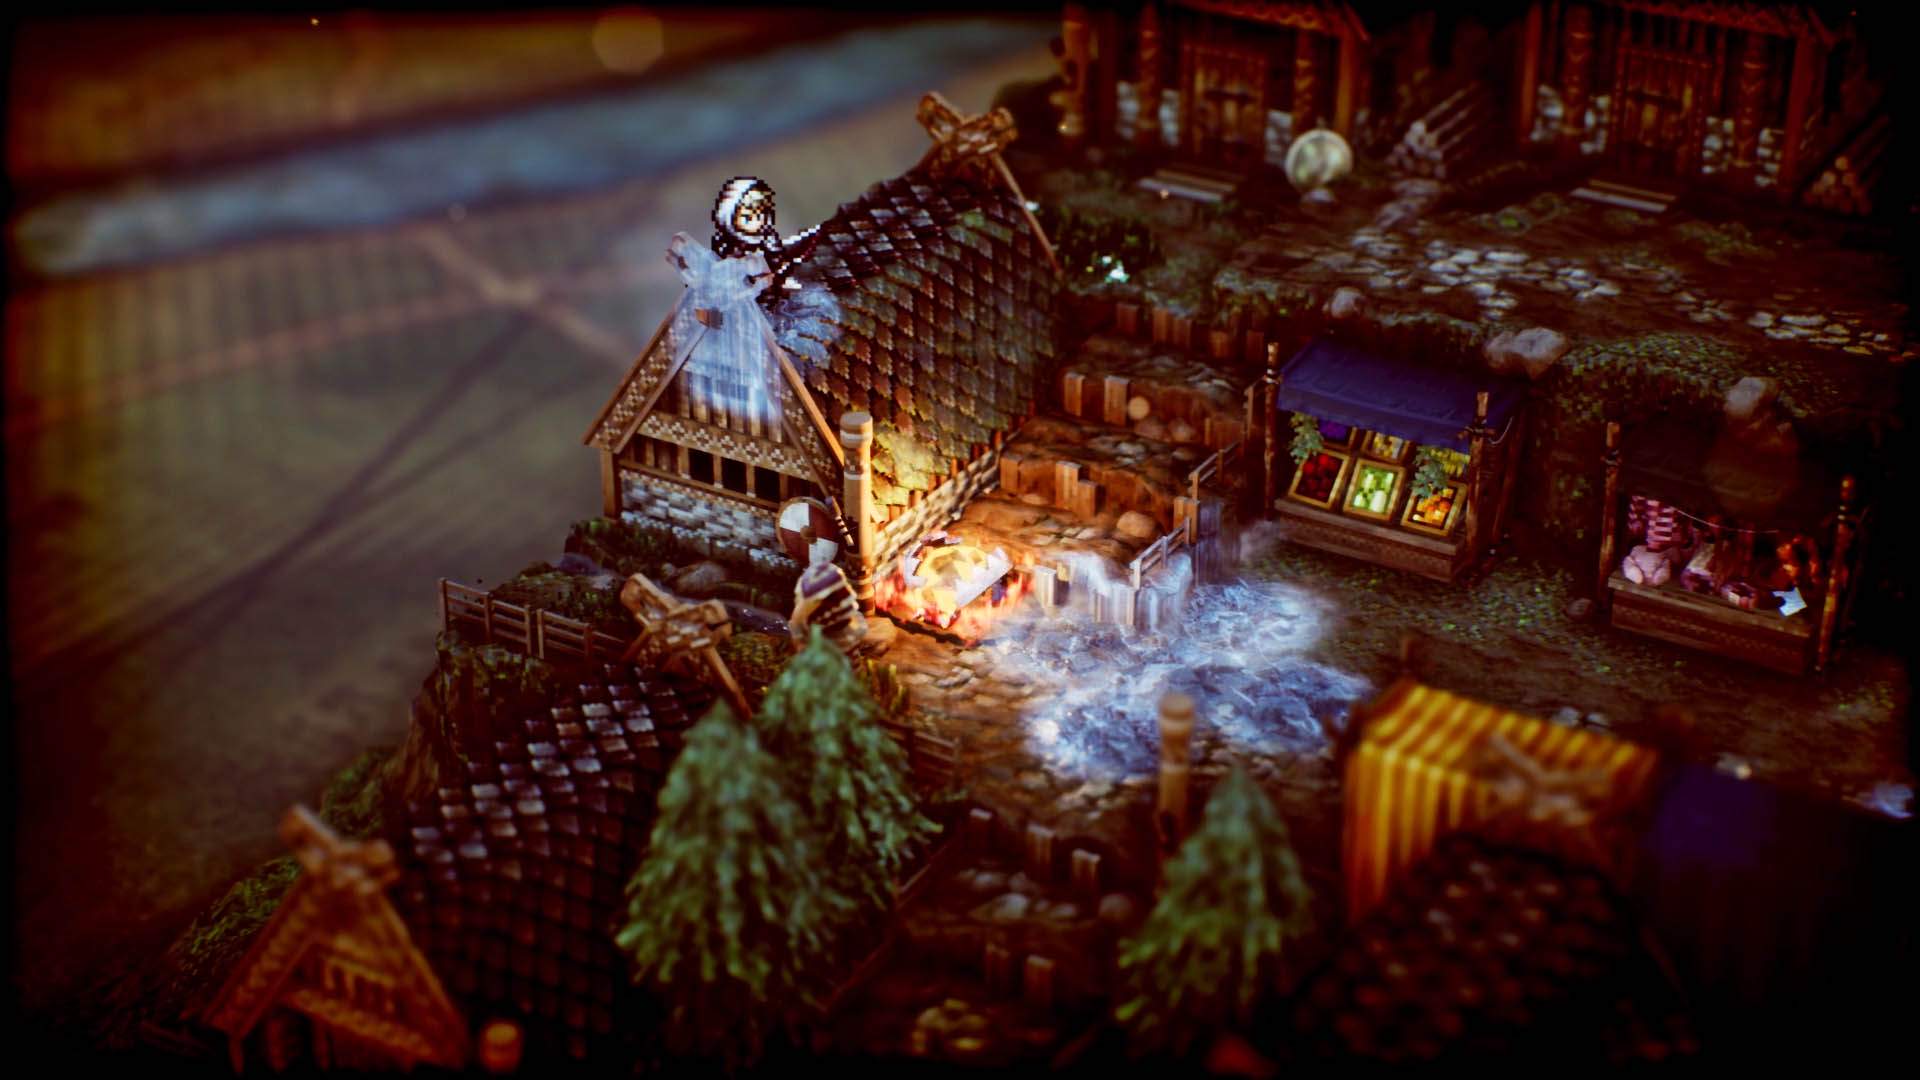 Gameplay screenshot showing Rudolph on a rooftop using a move in battle